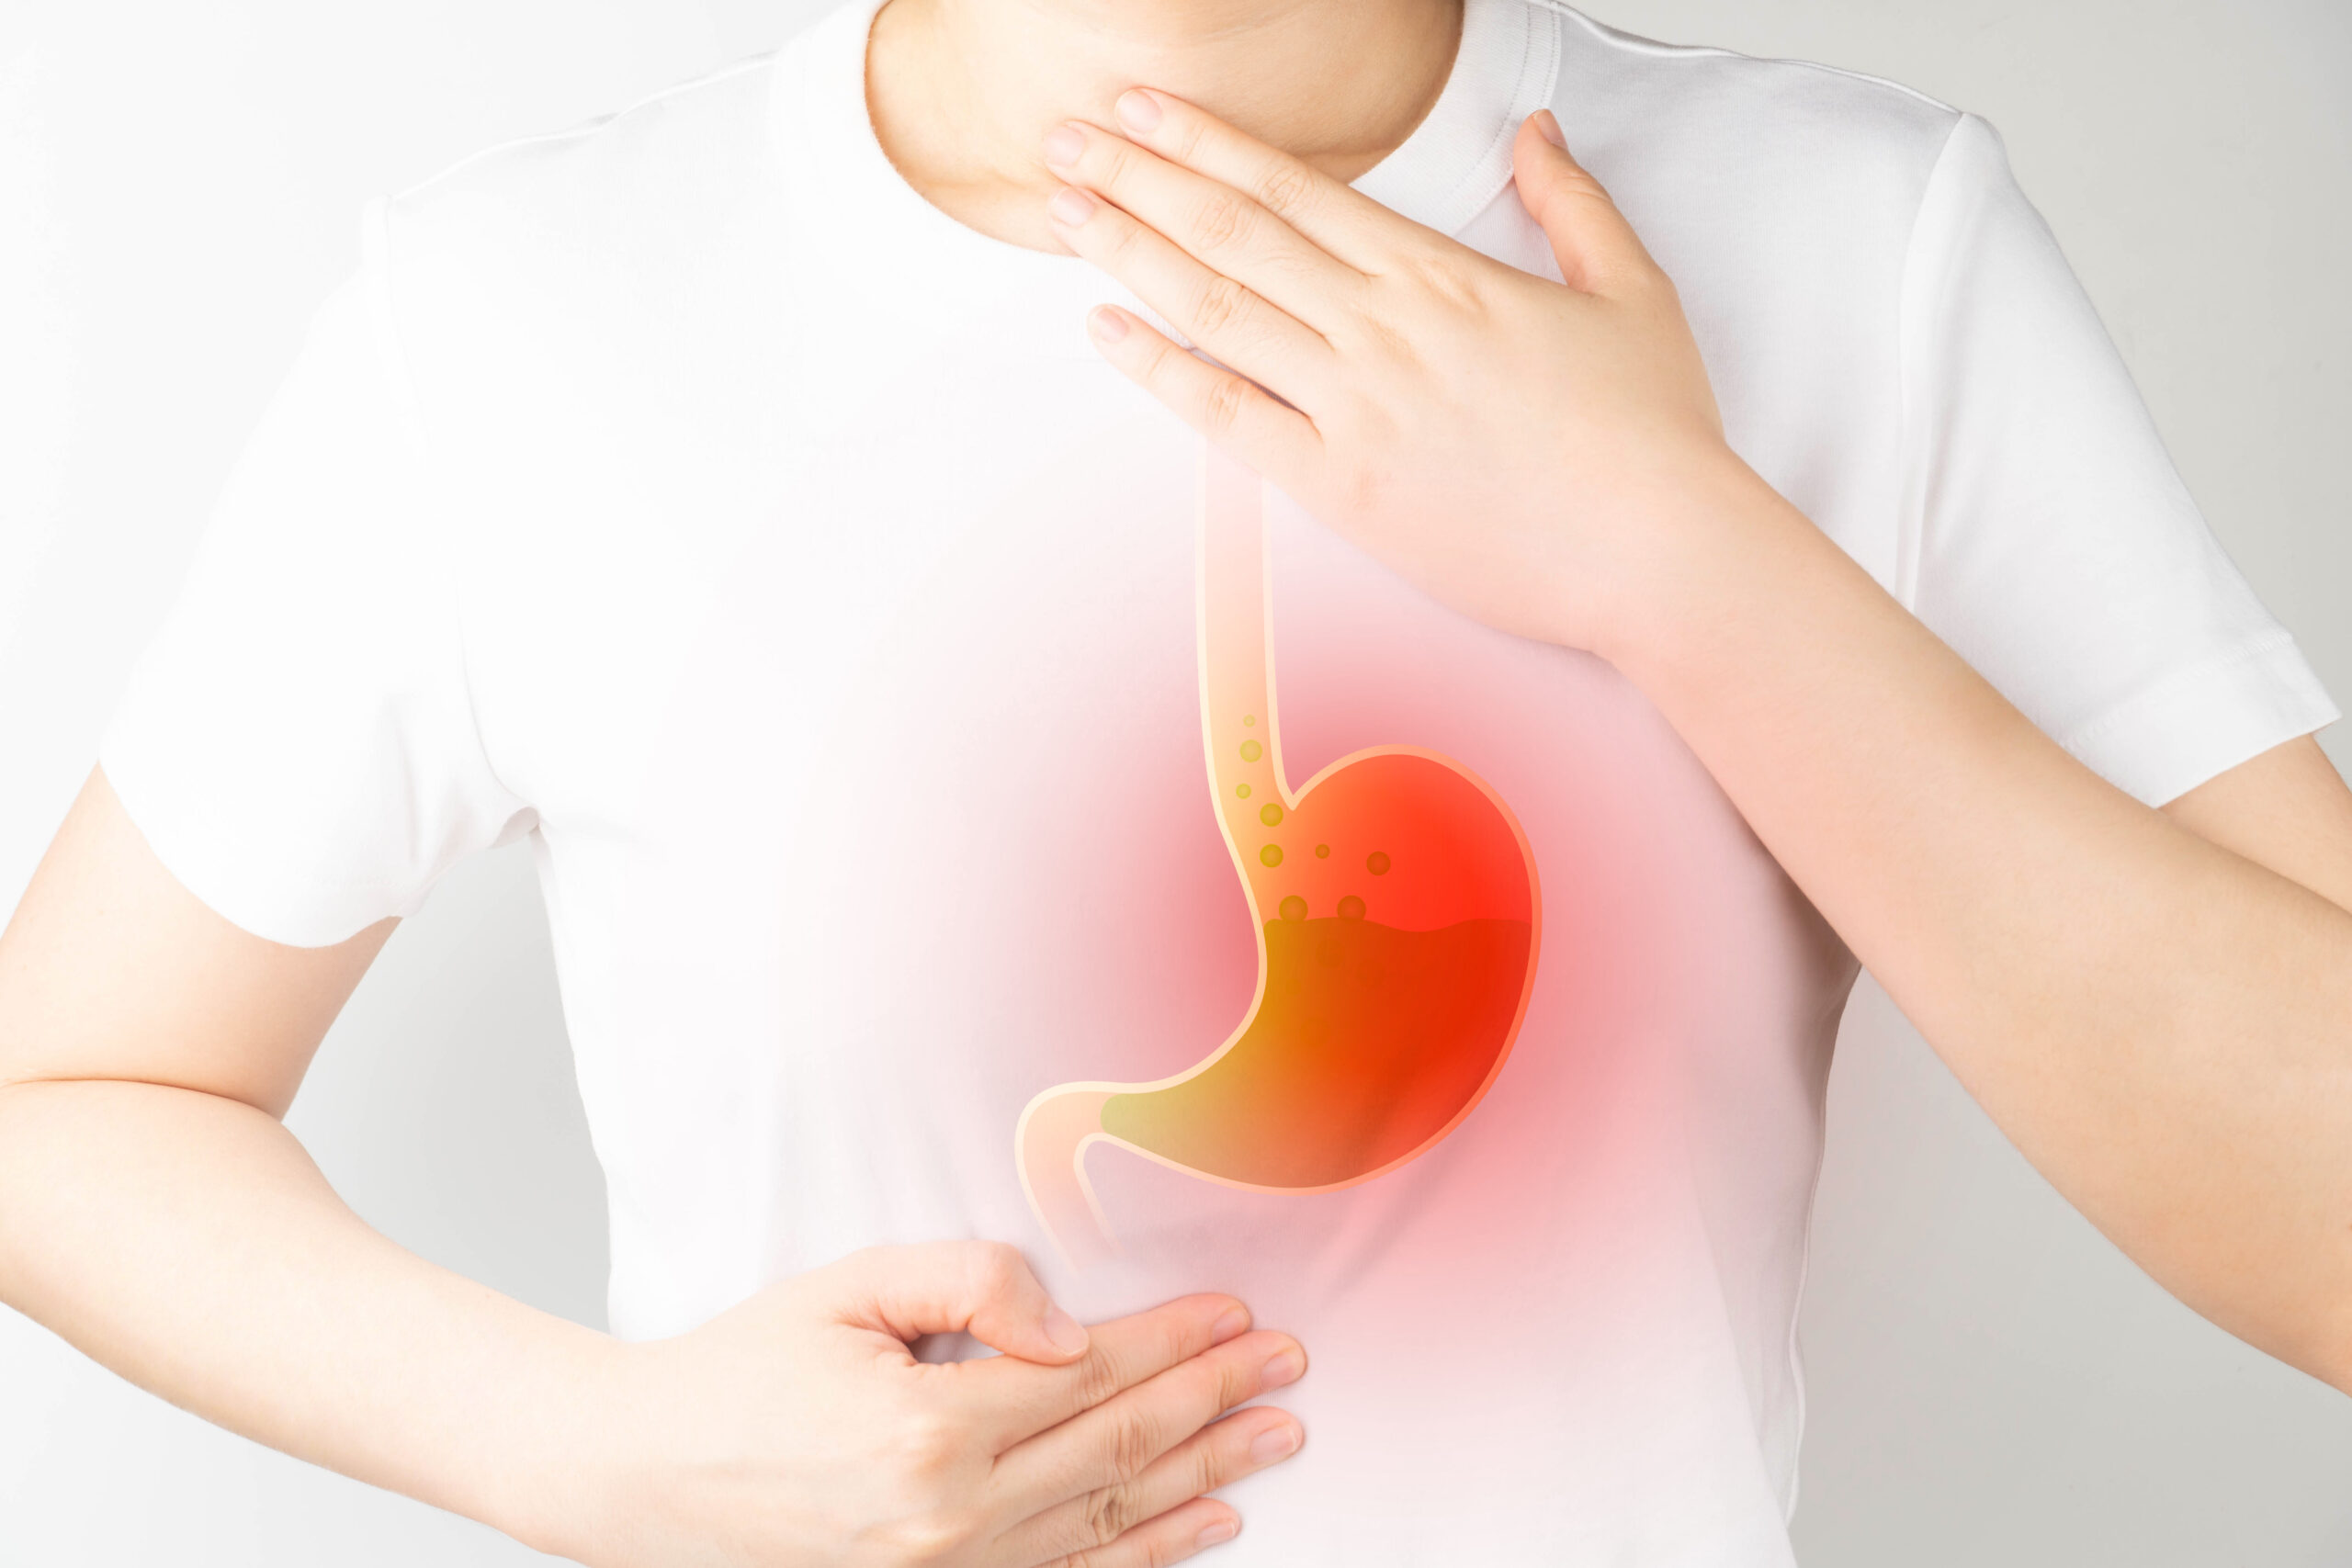 GERD: What Is, Symptoms, Causes, and Treatments